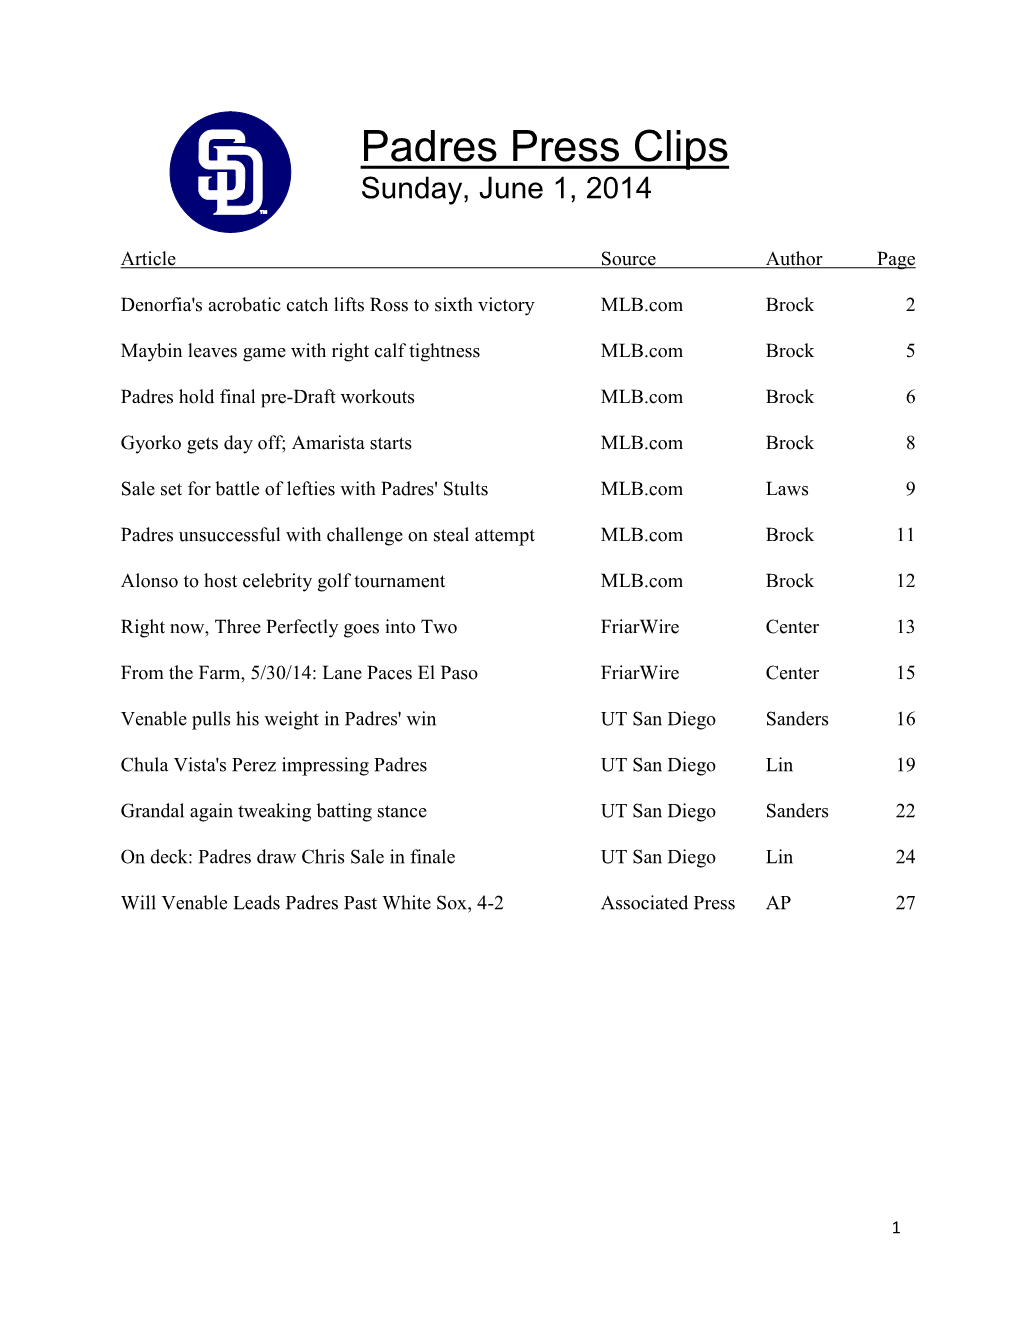 Padres Press Clips Sunday, June 1, 2014